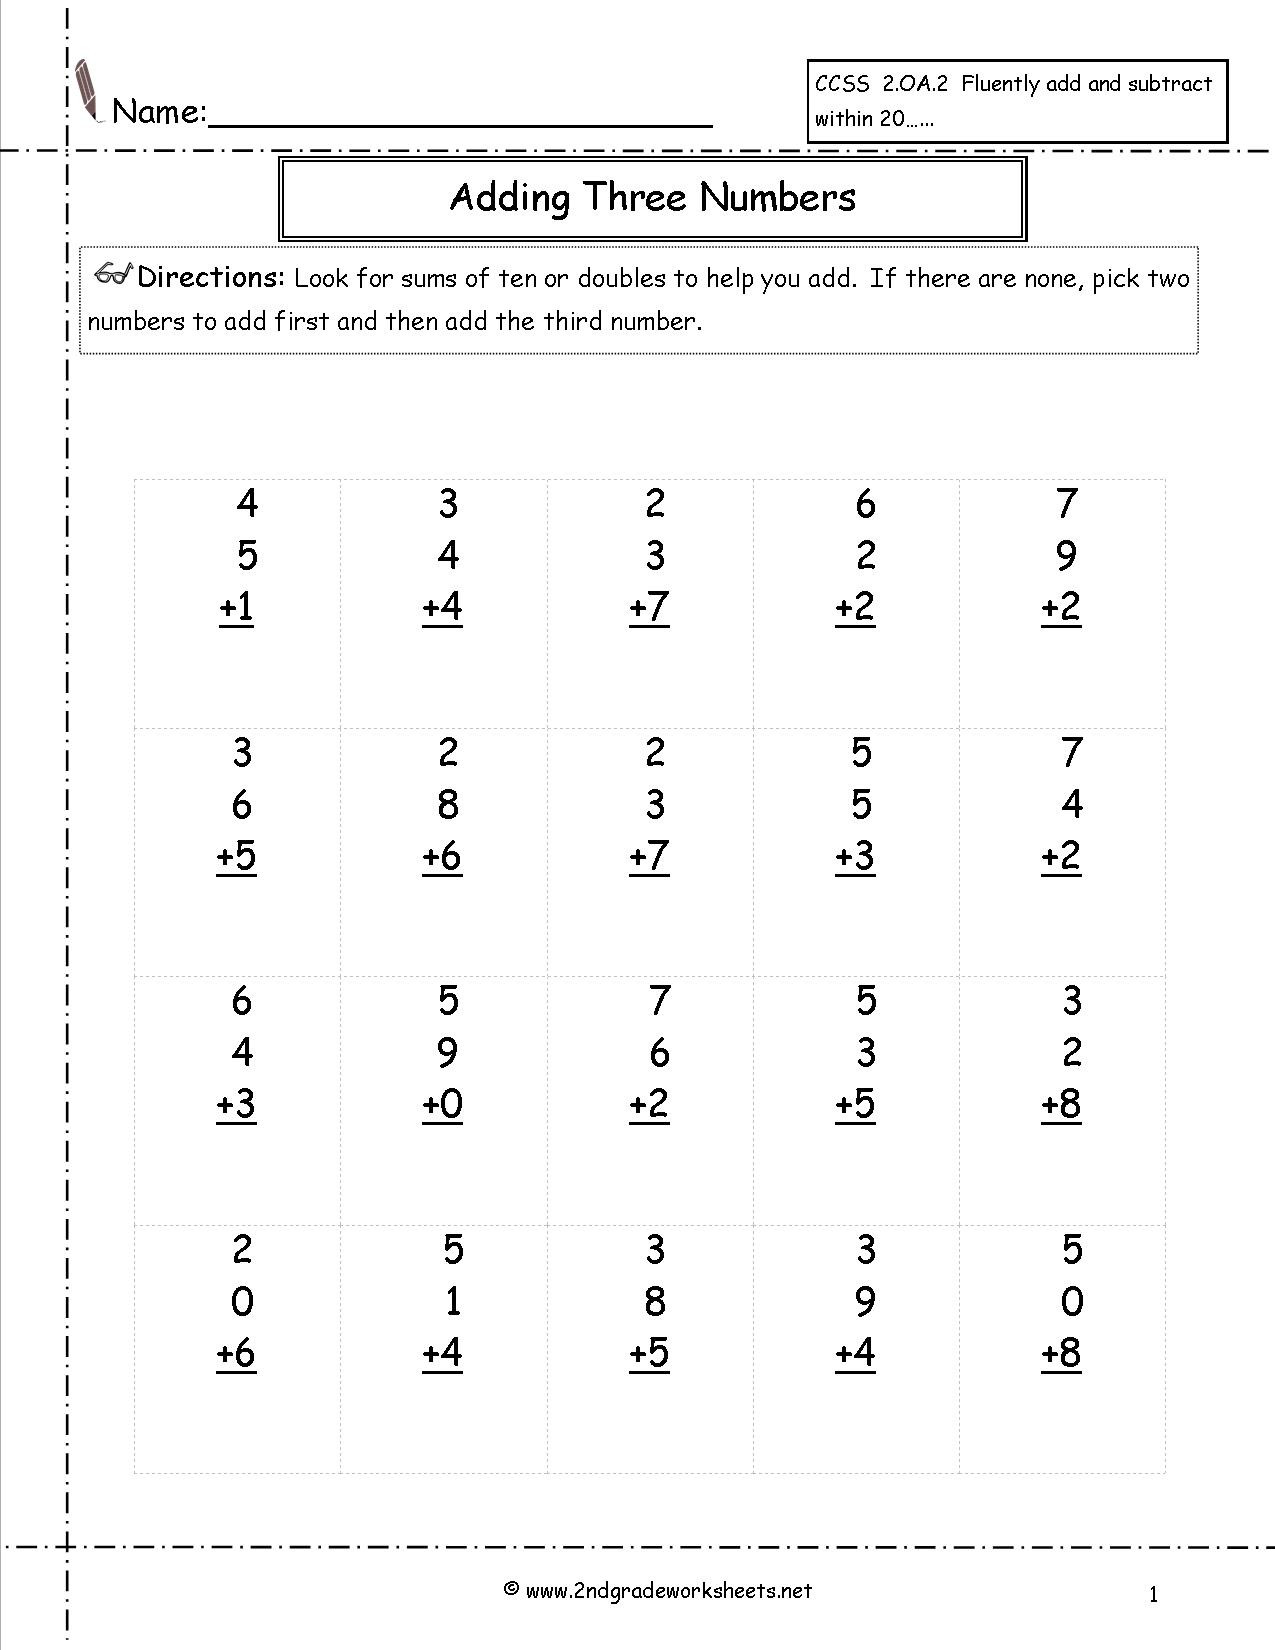 Free Math Worksheets Second Grade 2 Addition Add 3 Single Digit Numbers